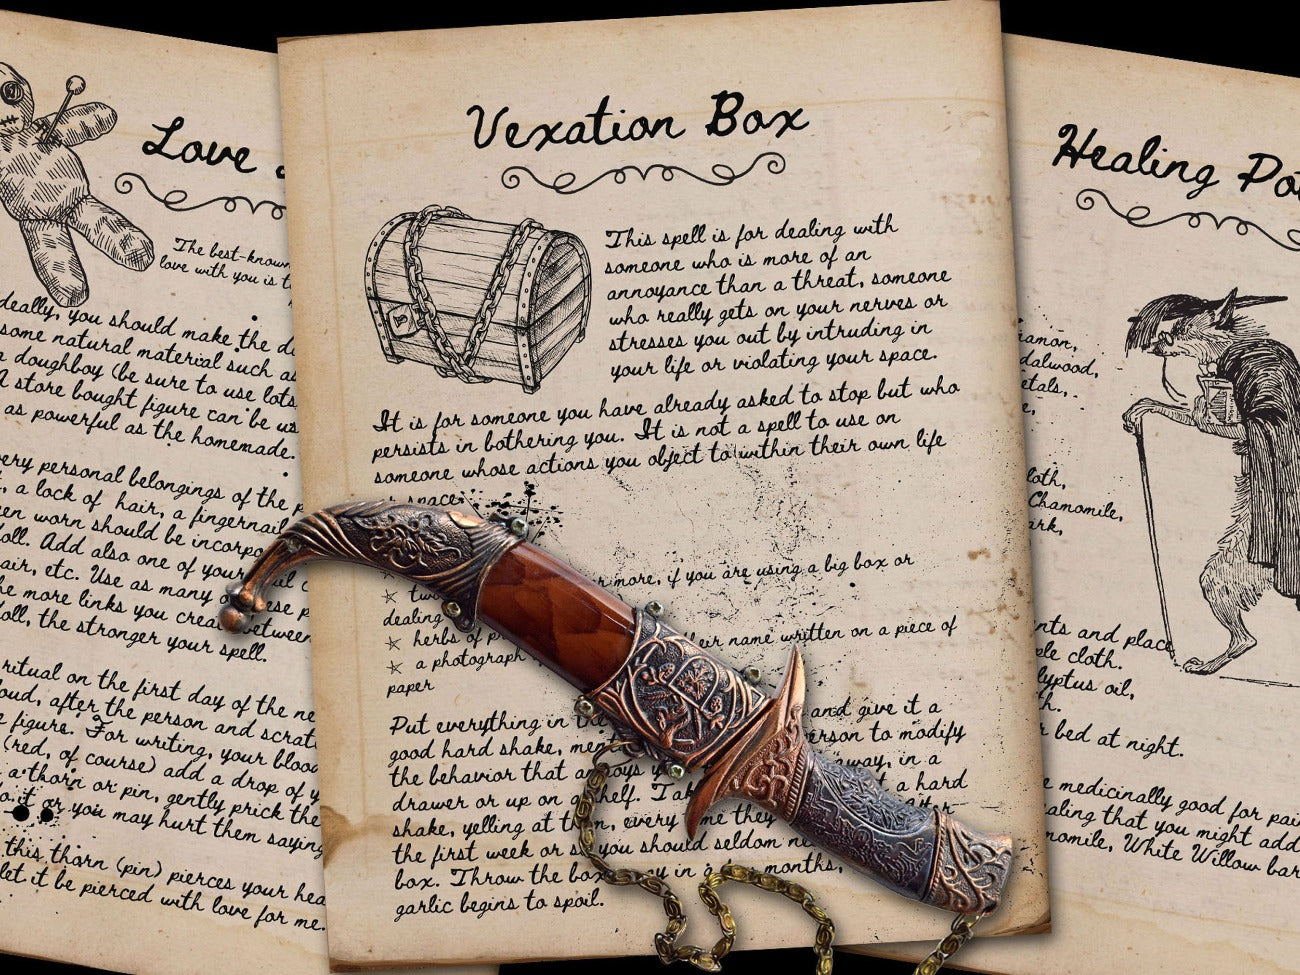 Love Doll, Vexation Box, and Healing potion pages are displayed with a sheathed ritual knife.